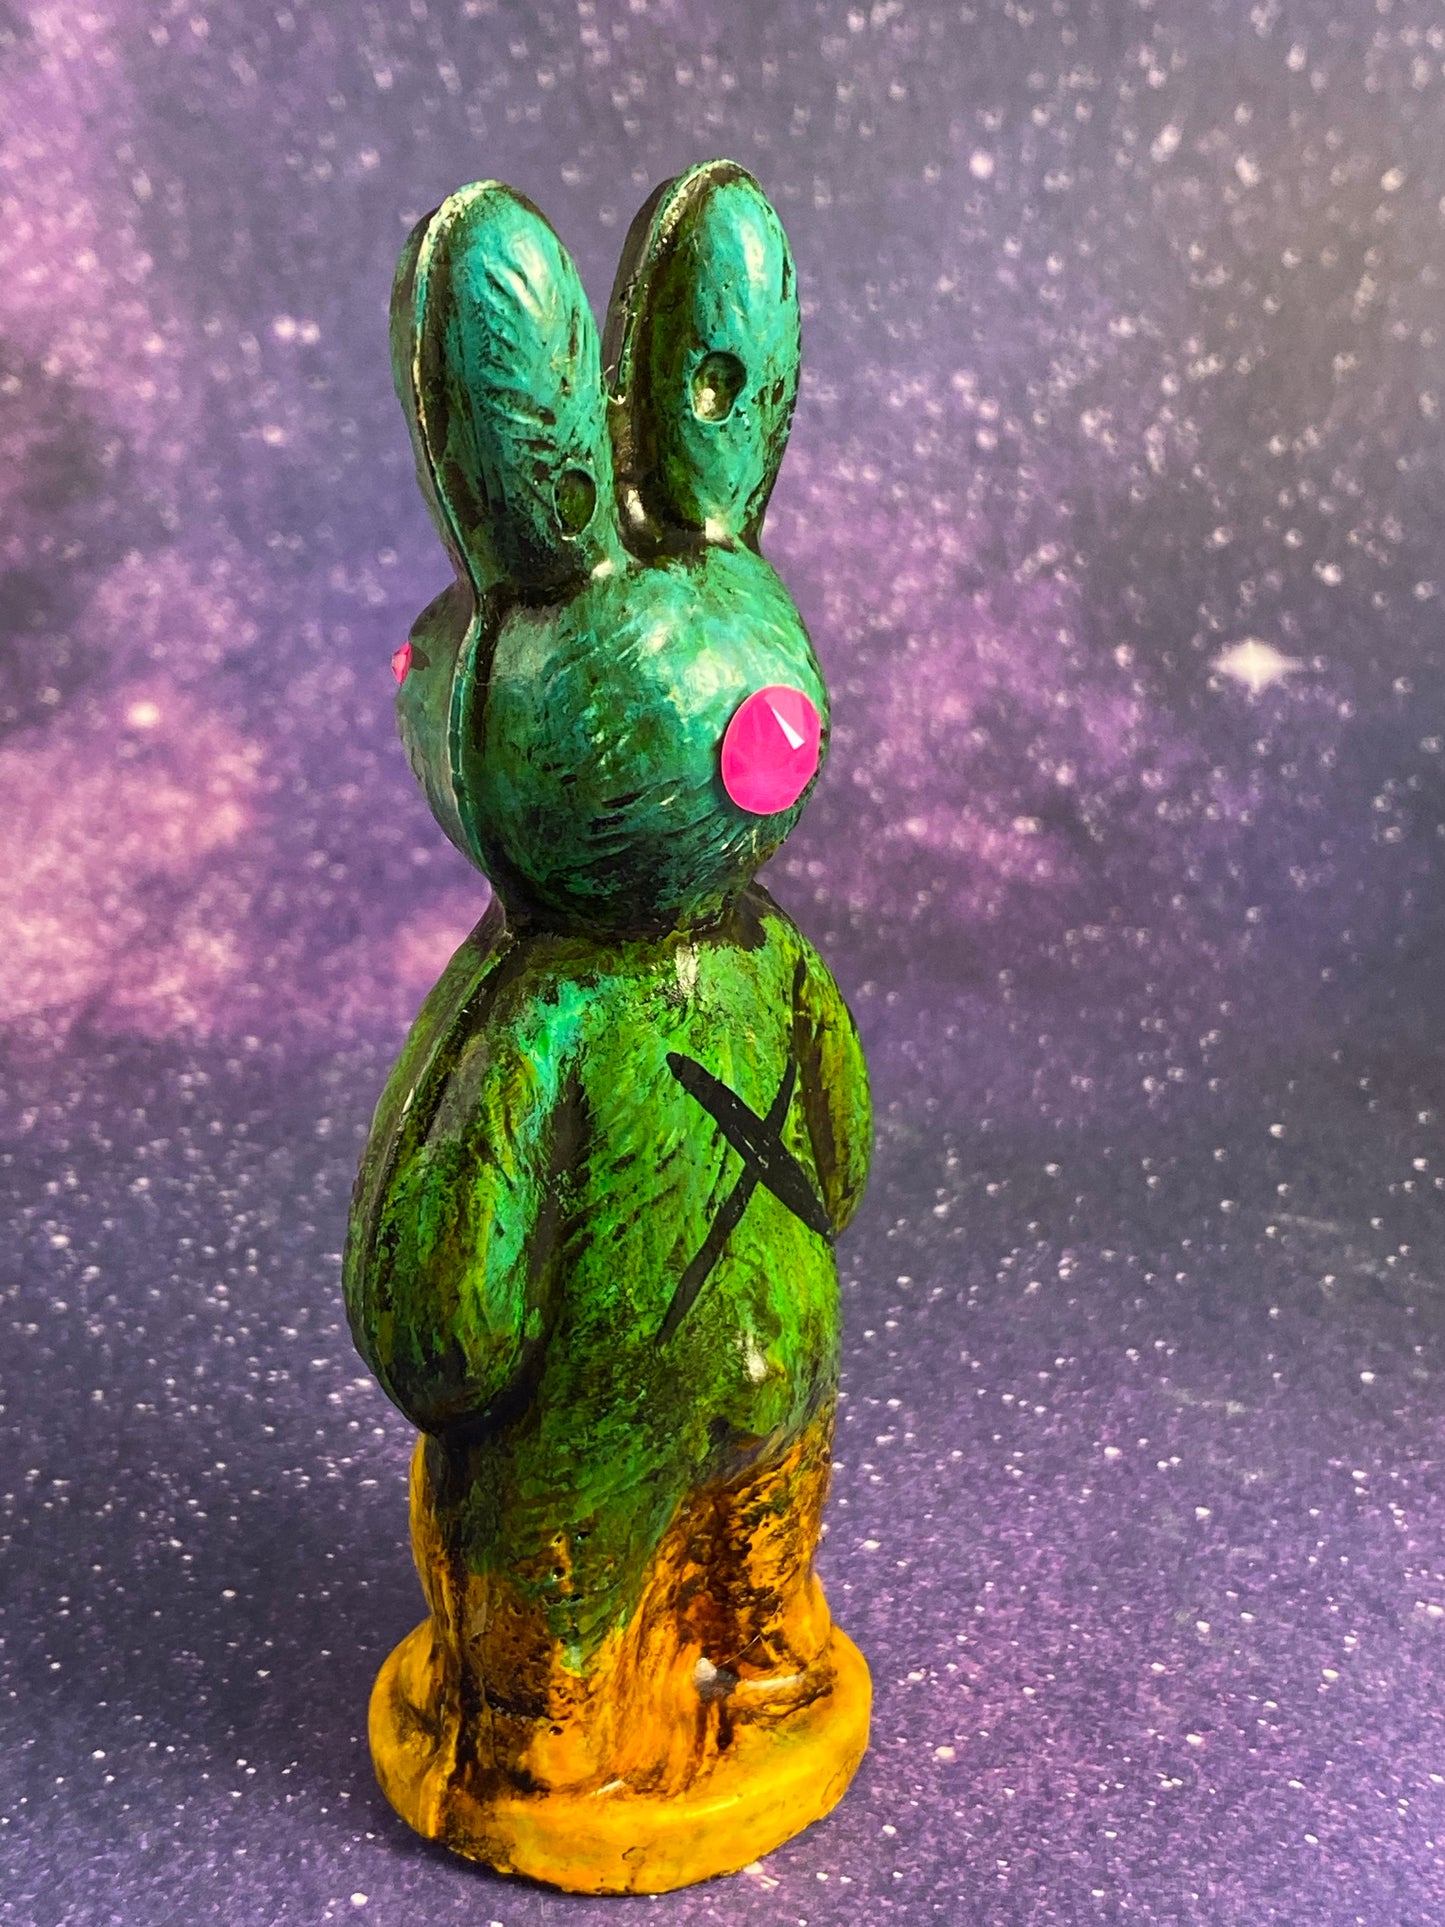 Ticked Off Space Rabbit